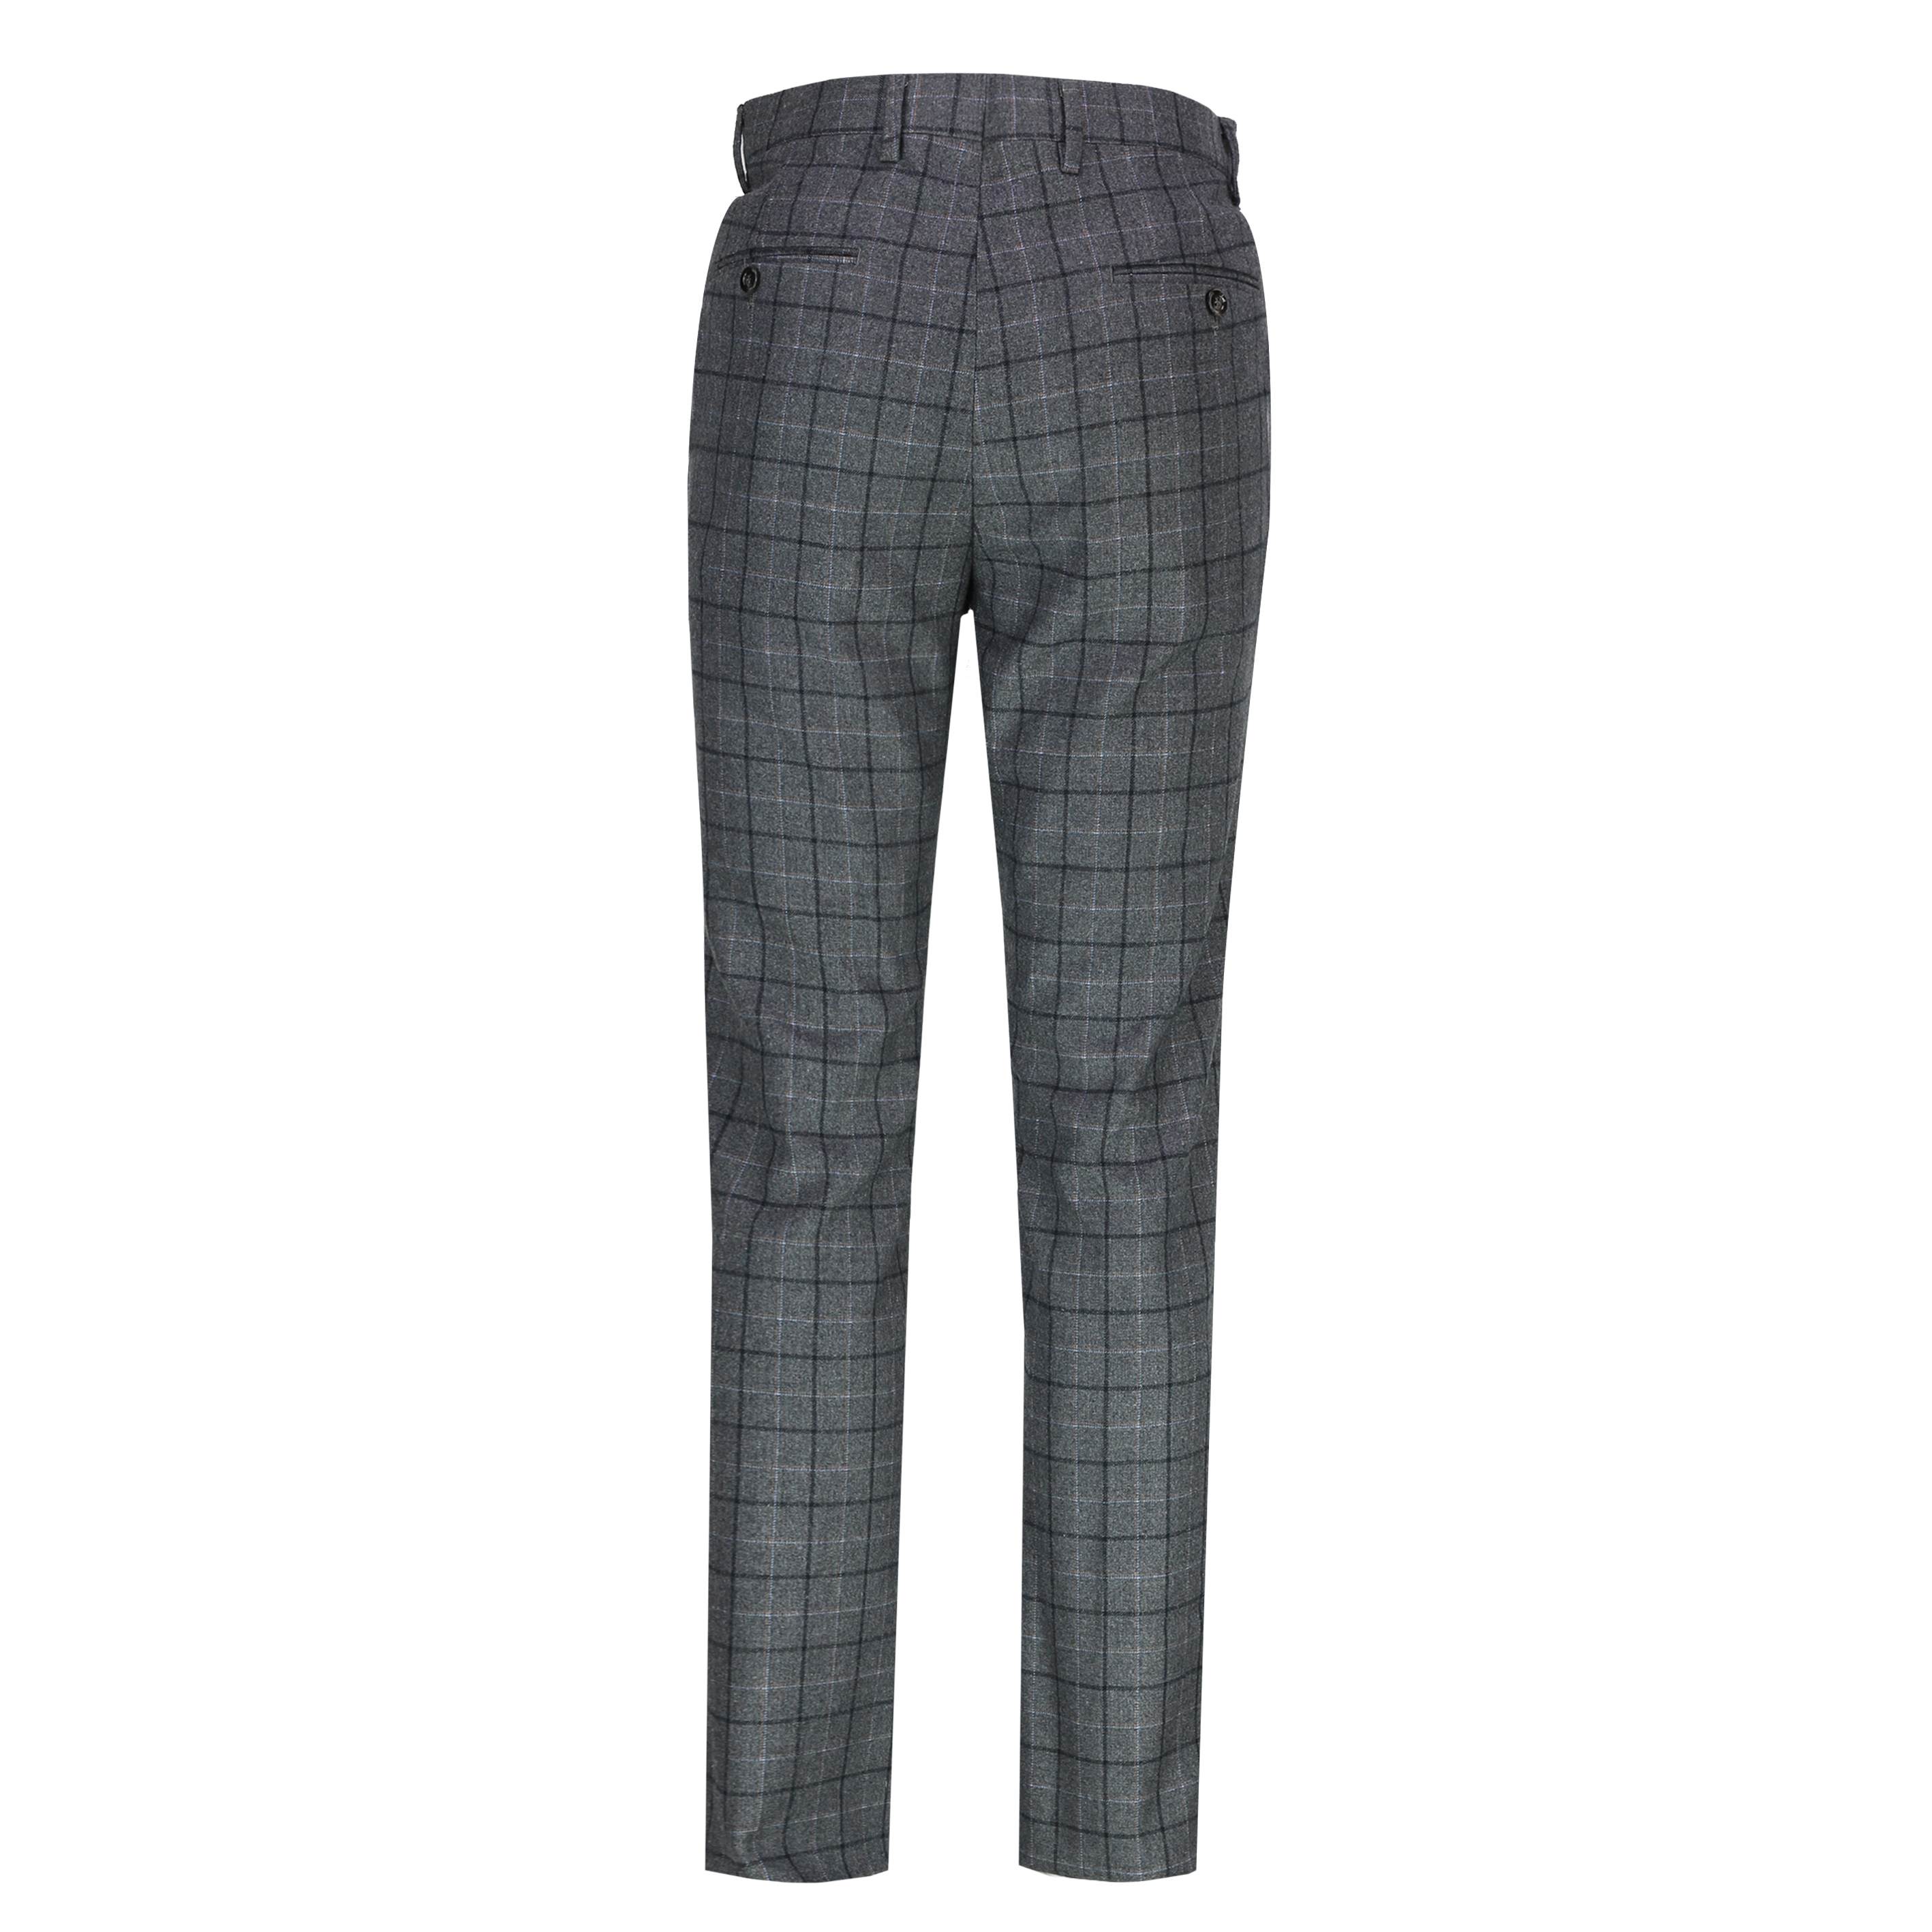 Mens Classic Tweed Windowpane Check Trousers Retro Vintage Tailor Fit ...